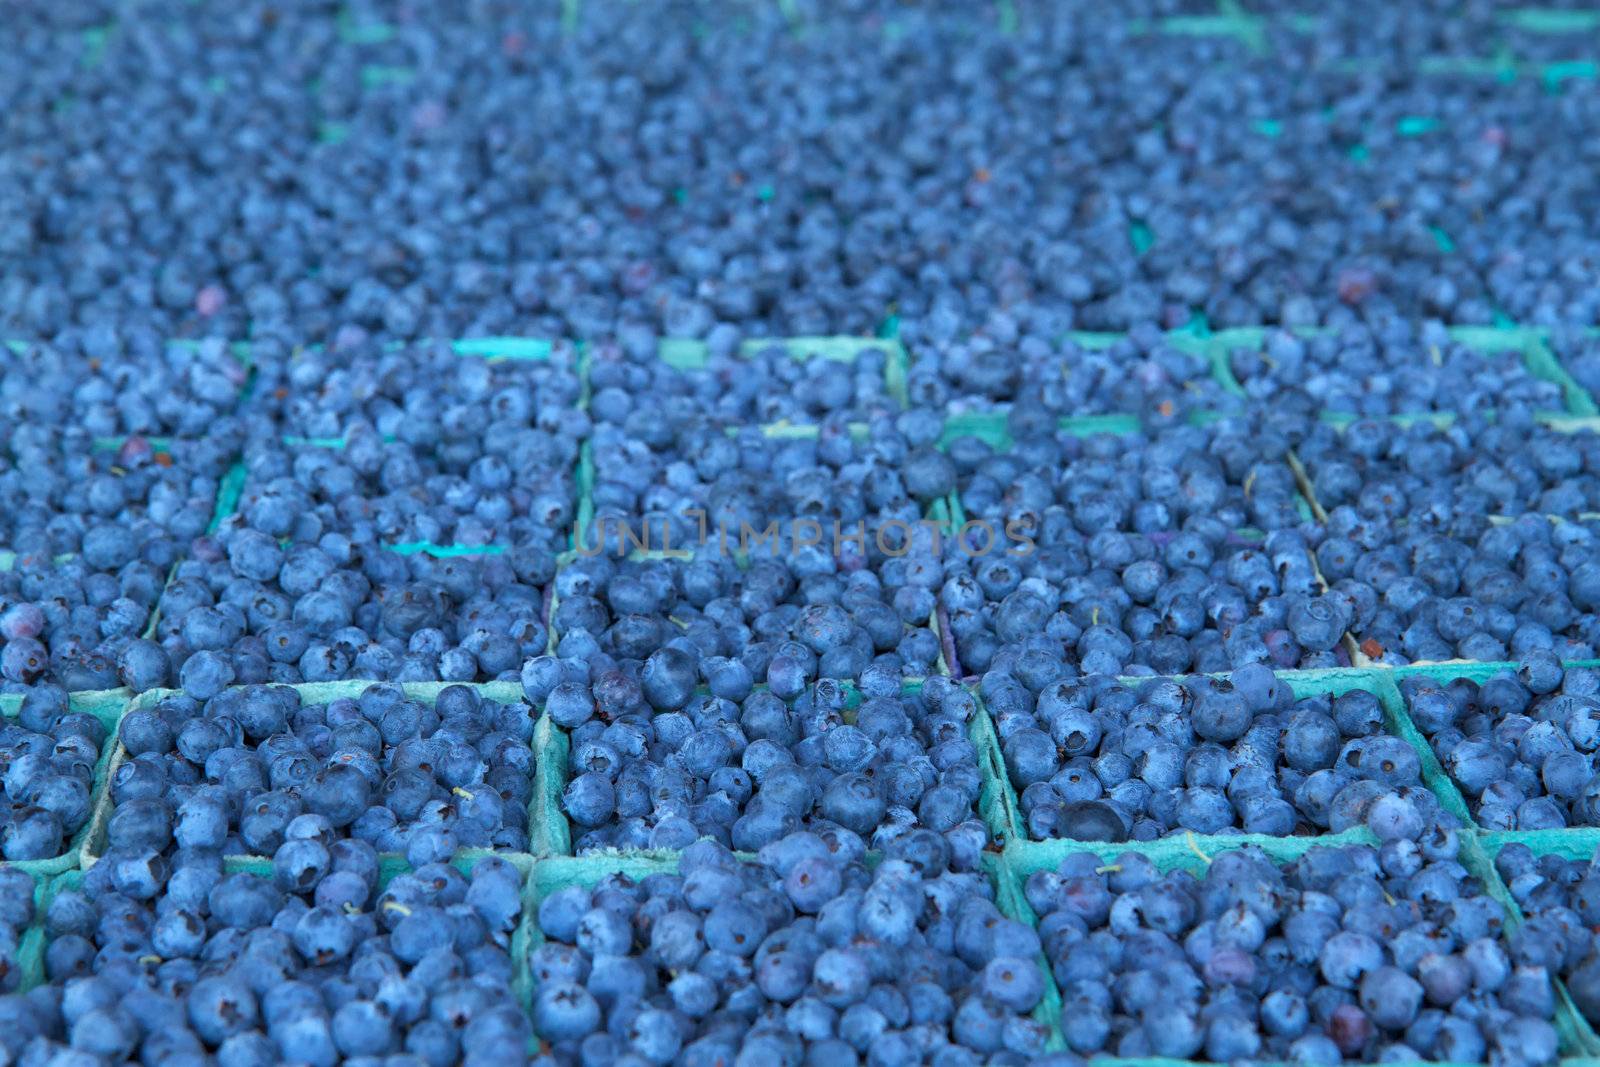 A full table of blueberries laid out for the farmers market